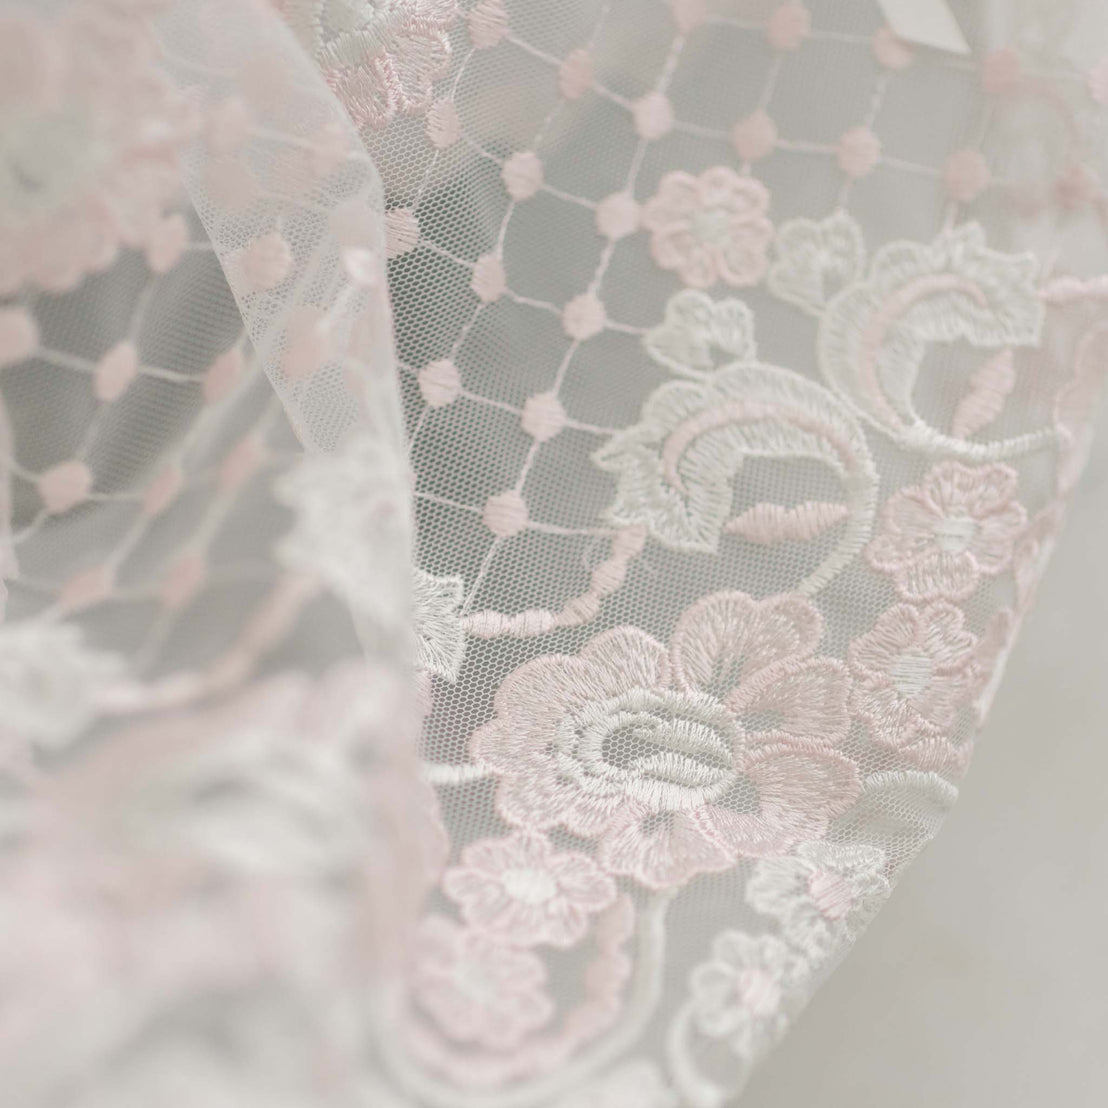 Close-up of a delicate white lace Joli Christening Gown with pink floral embroidery and mesh background, illustrating intricate textile details in the embroidered netting.